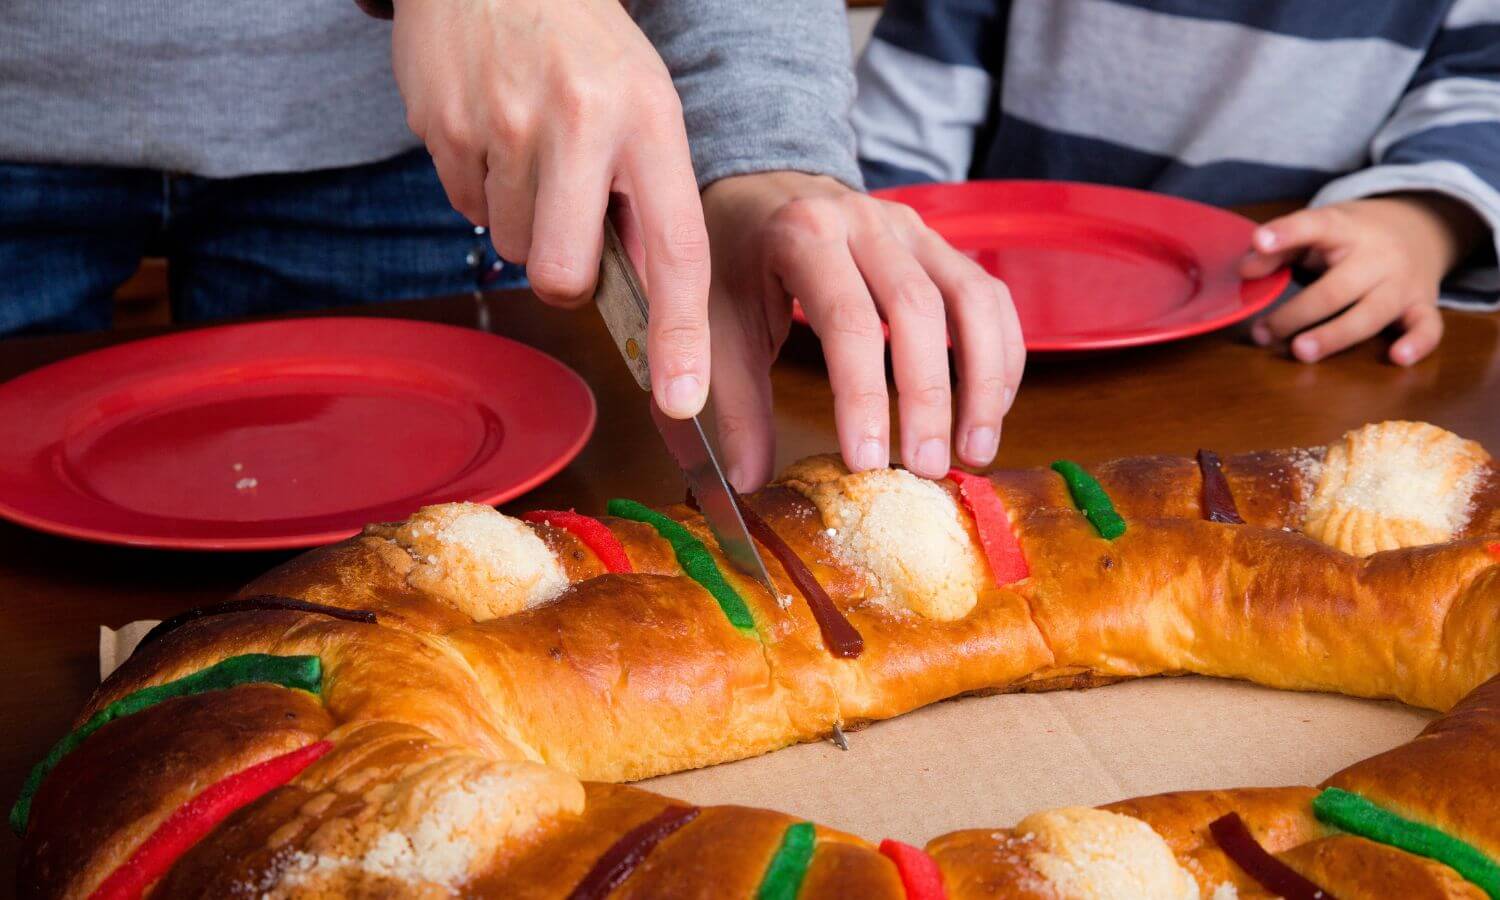 The traditional Christmas bread - Rosca del Reyes, being cut .